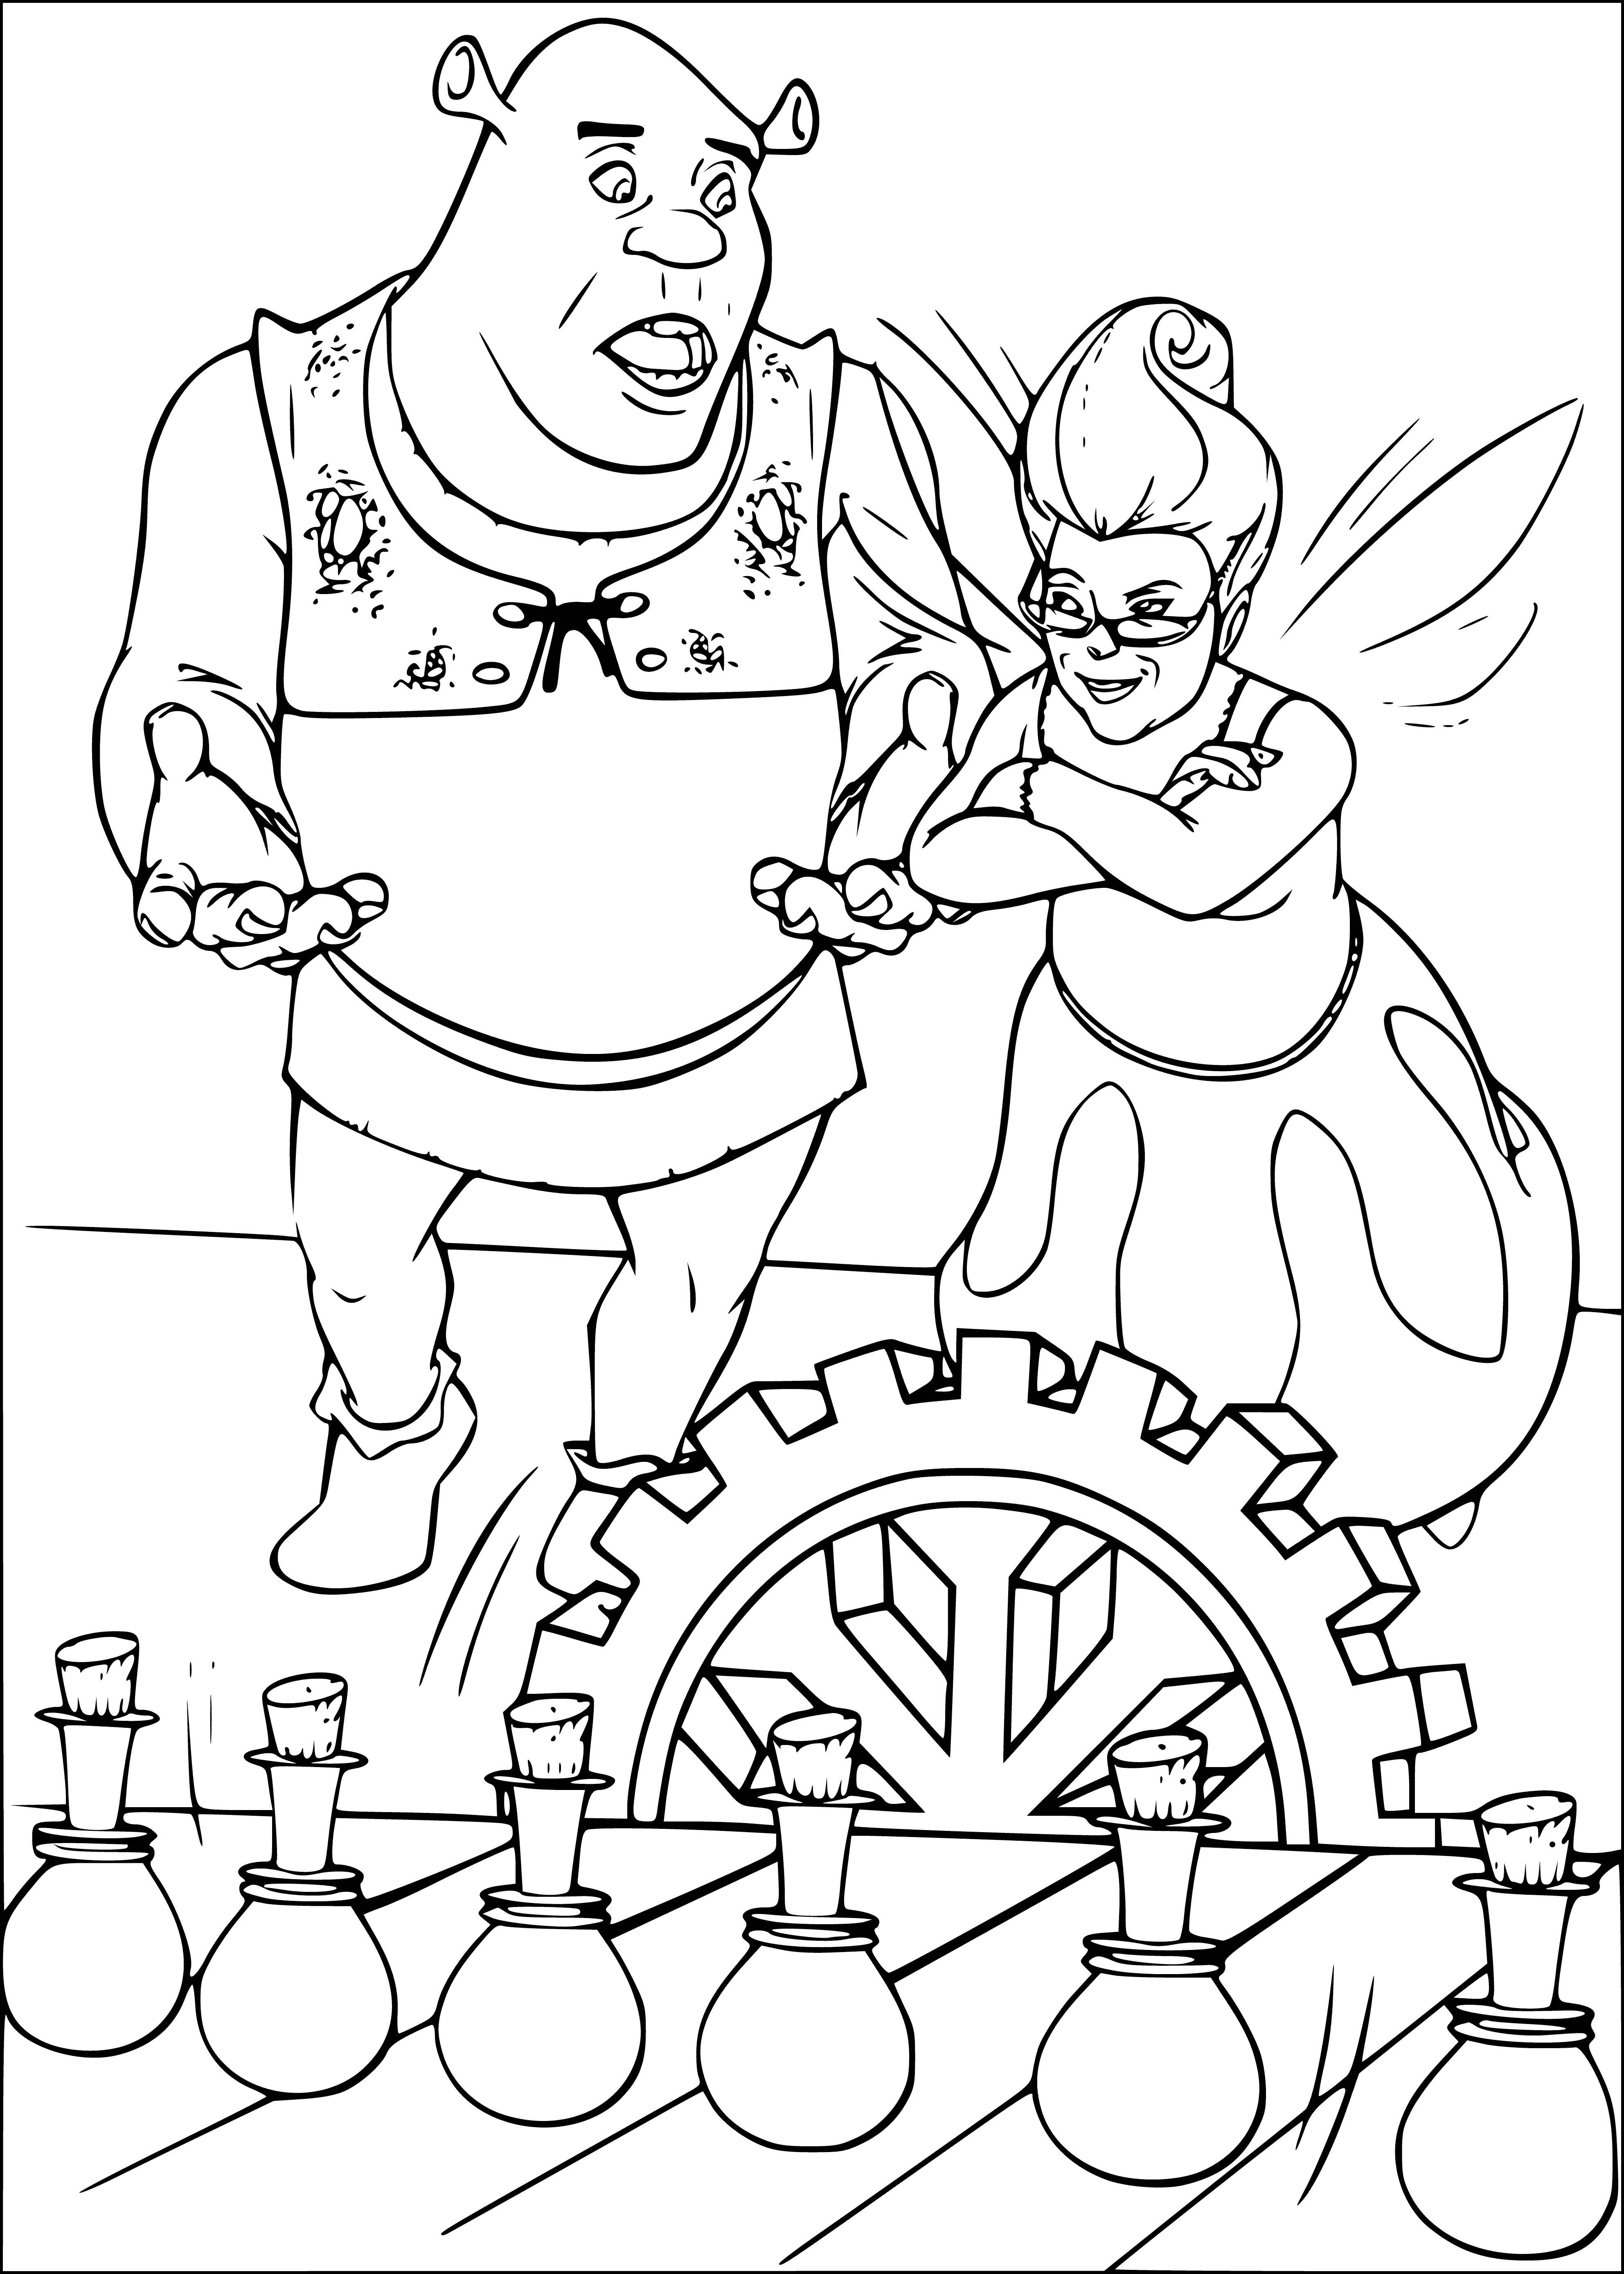 coloring page: Shrek, a giant green ogre, holds a terrified fairy by her wings with a wicked grin on his face.